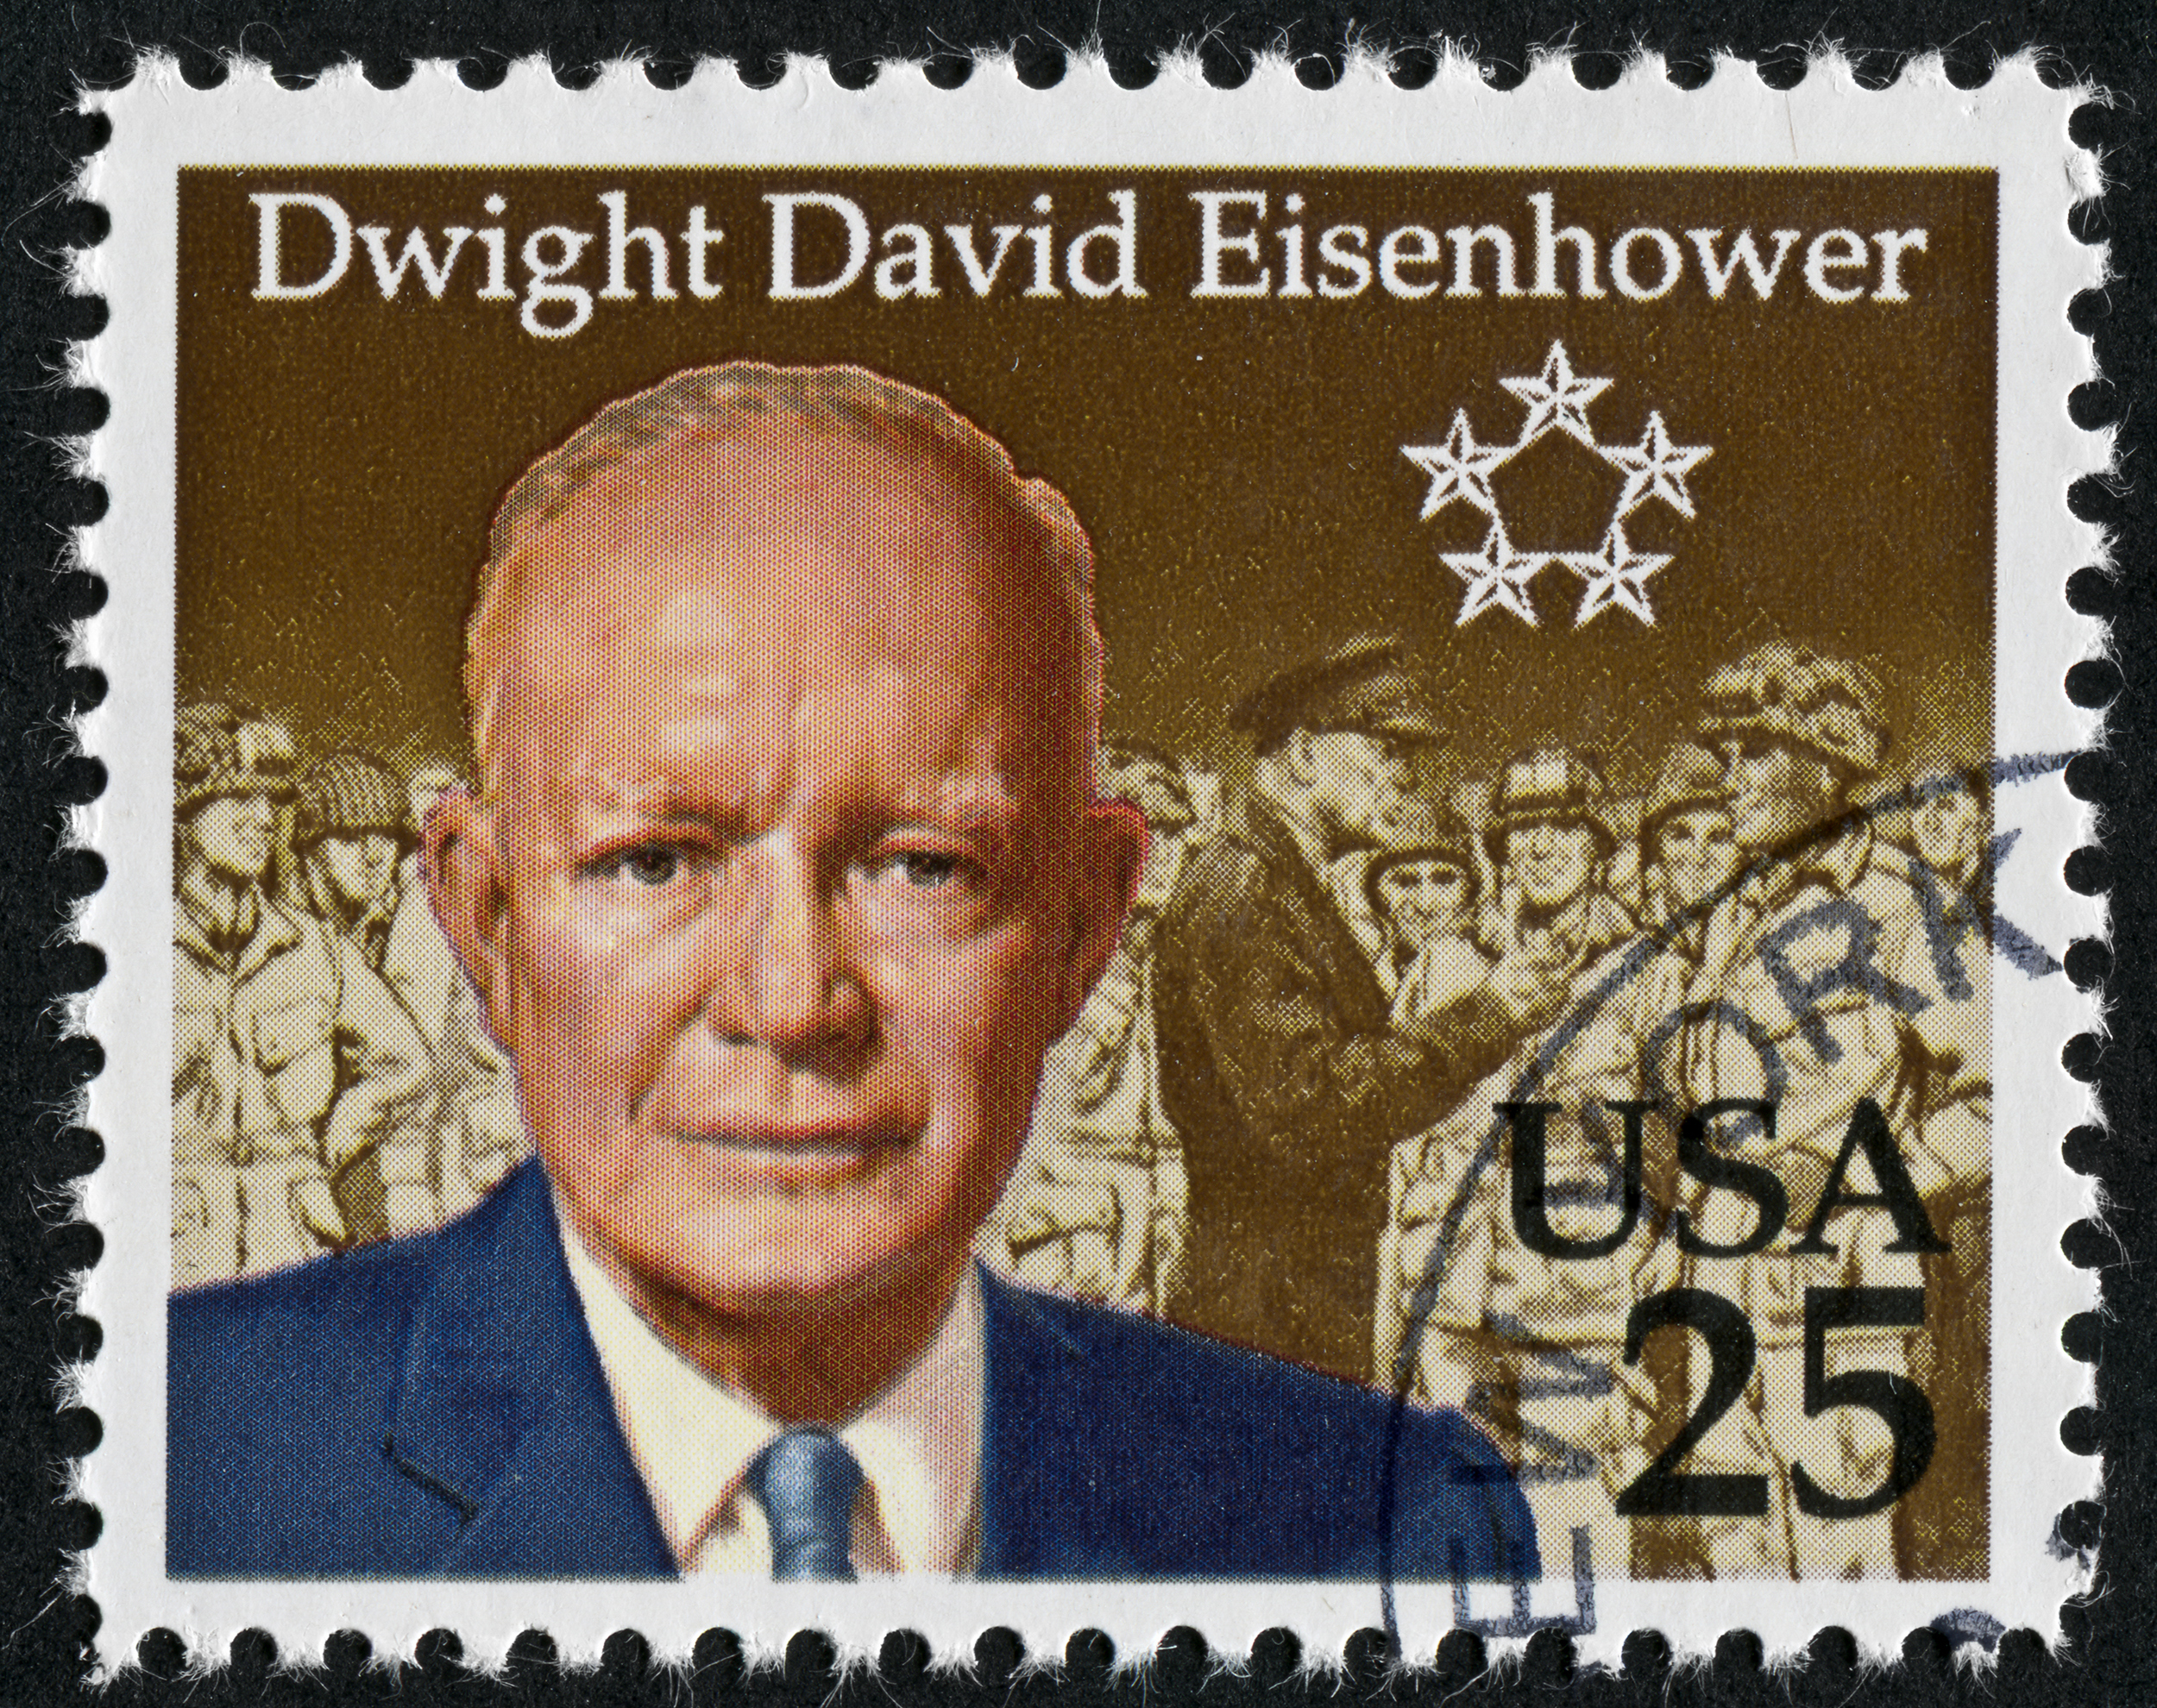 Cancelled Stamp From The United States Featuring The 34th President Of The USA, Dwight D. Eisenhower.